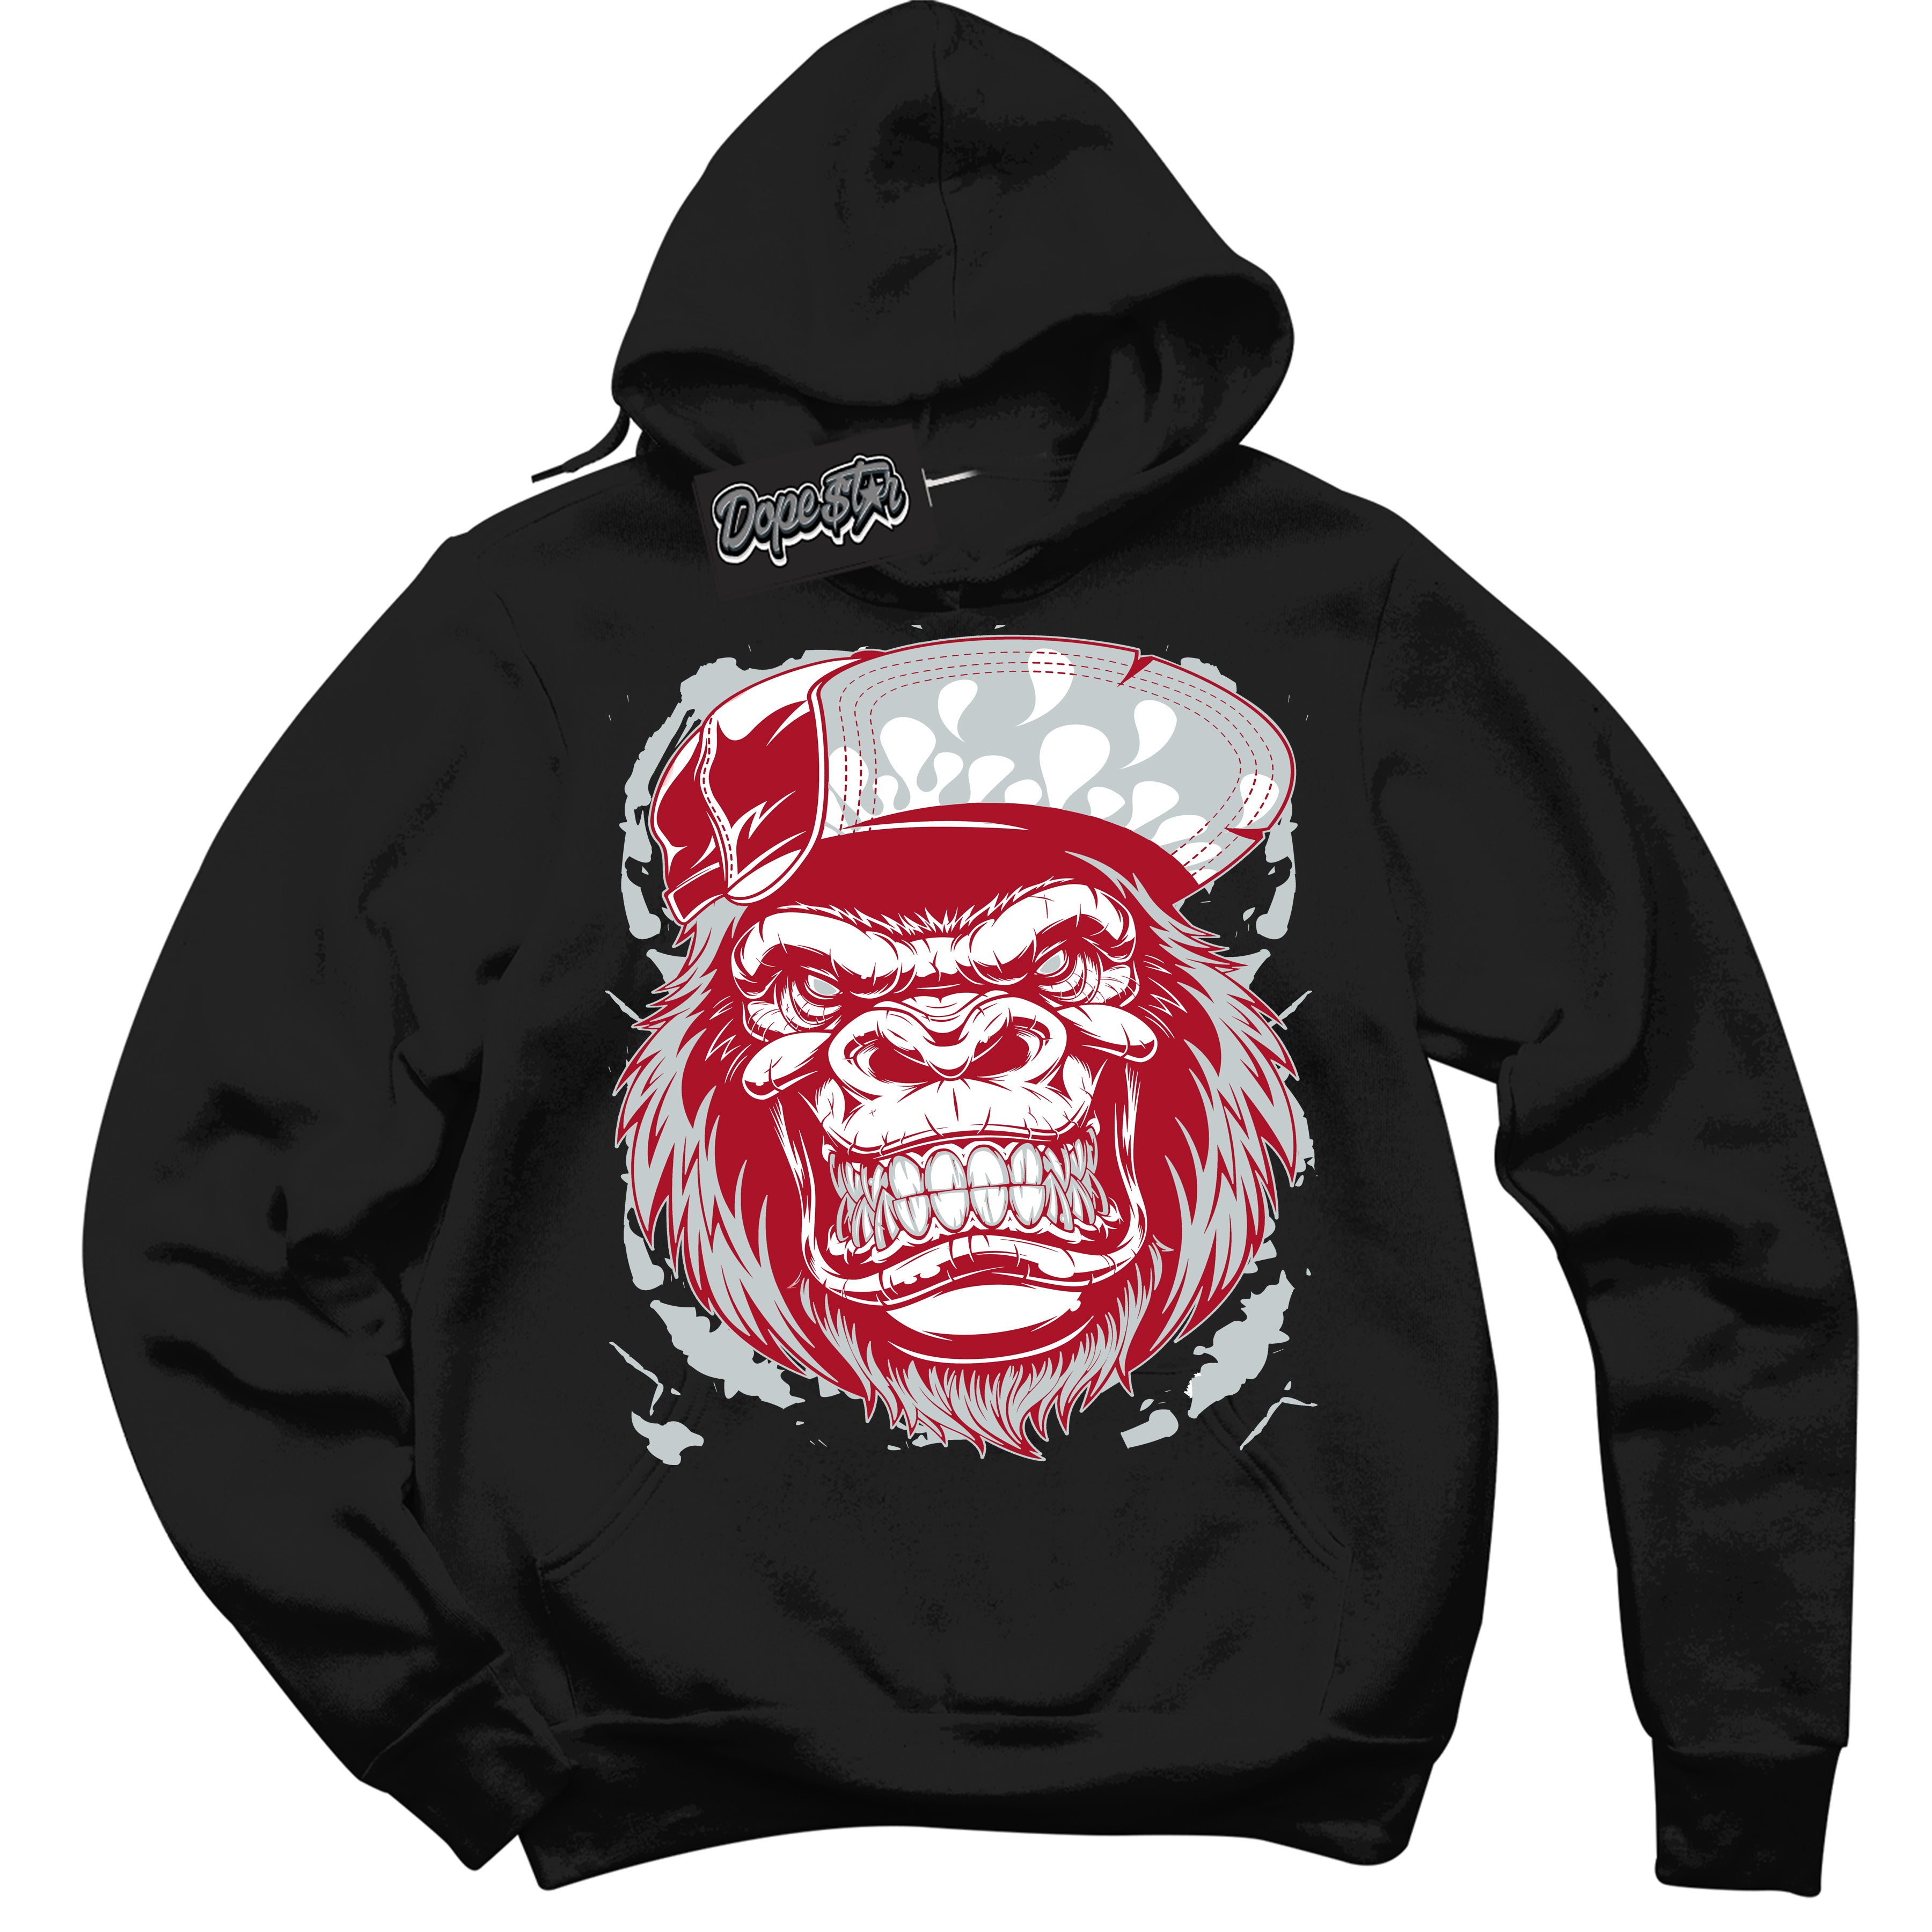 Cool Black Hoodie with “ Gorilla Beast ”  design that Perfectly Matches  Reverse Ultraman Sneakers.